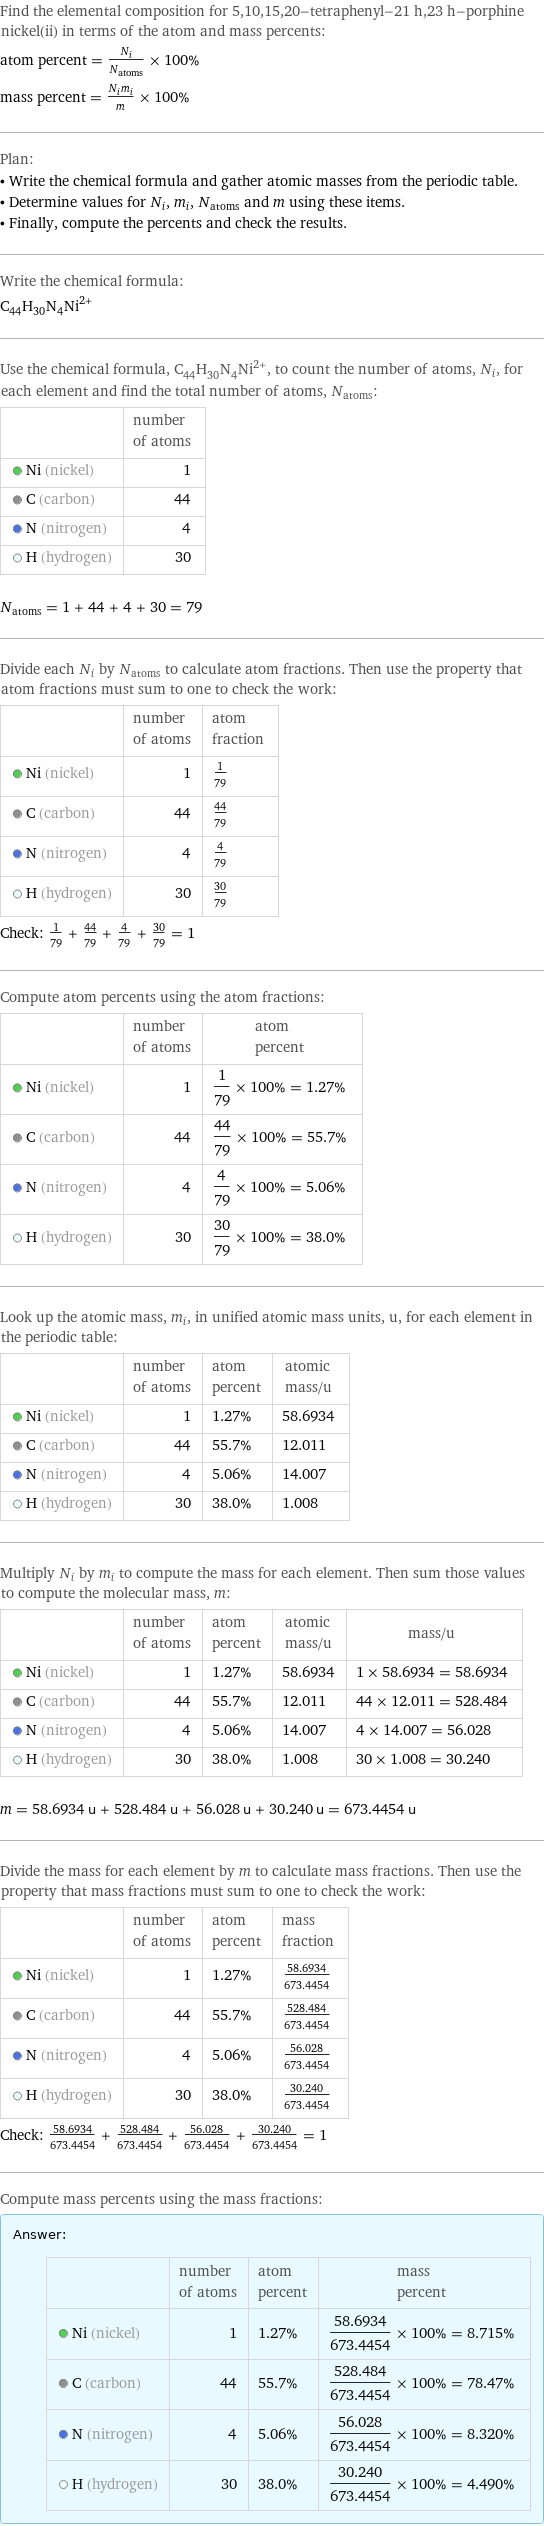 Find the elemental composition for 5, 10, 15, 20-tetraphenyl-21 h, 23 h-porphine nickel(ii) in terms of the atom and mass percents: atom percent = N_i/N_atoms × 100% mass percent = (N_im_i)/m × 100% Plan: • Write the chemical formula and gather atomic masses from the periodic table. • Determine values for N_i, m_i, N_atoms and m using these items. • Finally, compute the percents and check the results. Write the chemical formula: (C_44H_30N_4Ni)^2+ Use the chemical formula, (C_44H_30N_4Ni)^2+, to count the number of atoms, N_i, for each element and find the total number of atoms, N_atoms:  | number of atoms  Ni (nickel) | 1  C (carbon) | 44  N (nitrogen) | 4  H (hydrogen) | 30  N_atoms = 1 + 44 + 4 + 30 = 79 Divide each N_i by N_atoms to calculate atom fractions. Then use the property that atom fractions must sum to one to check the work:  | number of atoms | atom fraction  Ni (nickel) | 1 | 1/79  C (carbon) | 44 | 44/79  N (nitrogen) | 4 | 4/79  H (hydrogen) | 30 | 30/79 Check: 1/79 + 44/79 + 4/79 + 30/79 = 1 Compute atom percents using the atom fractions:  | number of atoms | atom percent  Ni (nickel) | 1 | 1/79 × 100% = 1.27%  C (carbon) | 44 | 44/79 × 100% = 55.7%  N (nitrogen) | 4 | 4/79 × 100% = 5.06%  H (hydrogen) | 30 | 30/79 × 100% = 38.0% Look up the atomic mass, m_i, in unified atomic mass units, u, for each element in the periodic table:  | number of atoms | atom percent | atomic mass/u  Ni (nickel) | 1 | 1.27% | 58.6934  C (carbon) | 44 | 55.7% | 12.011  N (nitrogen) | 4 | 5.06% | 14.007  H (hydrogen) | 30 | 38.0% | 1.008 Multiply N_i by m_i to compute the mass for each element. Then sum those values to compute the molecular mass, m:  | number of atoms | atom percent | atomic mass/u | mass/u  Ni (nickel) | 1 | 1.27% | 58.6934 | 1 × 58.6934 = 58.6934  C (carbon) | 44 | 55.7% | 12.011 | 44 × 12.011 = 528.484  N (nitrogen) | 4 | 5.06% | 14.007 | 4 × 14.007 = 56.028  H (hydrogen) | 30 | 38.0% | 1.008 | 30 × 1.008 = 30.240  m = 58.6934 u + 528.484 u + 56.028 u + 30.240 u = 673.4454 u Divide the mass for each element by m to calculate mass fractions. Then use the property that mass fractions must sum to one to check the work:  | number of atoms | atom percent | mass fraction  Ni (nickel) | 1 | 1.27% | 58.6934/673.4454  C (carbon) | 44 | 55.7% | 528.484/673.4454  N (nitrogen) | 4 | 5.06% | 56.028/673.4454  H (hydrogen) | 30 | 38.0% | 30.240/673.4454 Check: 58.6934/673.4454 + 528.484/673.4454 + 56.028/673.4454 + 30.240/673.4454 = 1 Compute mass percents using the mass fractions: Answer: |   | | number of atoms | atom percent | mass percent  Ni (nickel) | 1 | 1.27% | 58.6934/673.4454 × 100% = 8.715%  C (carbon) | 44 | 55.7% | 528.484/673.4454 × 100% = 78.47%  N (nitrogen) | 4 | 5.06% | 56.028/673.4454 × 100% = 8.320%  H (hydrogen) | 30 | 38.0% | 30.240/673.4454 × 100% = 4.490%